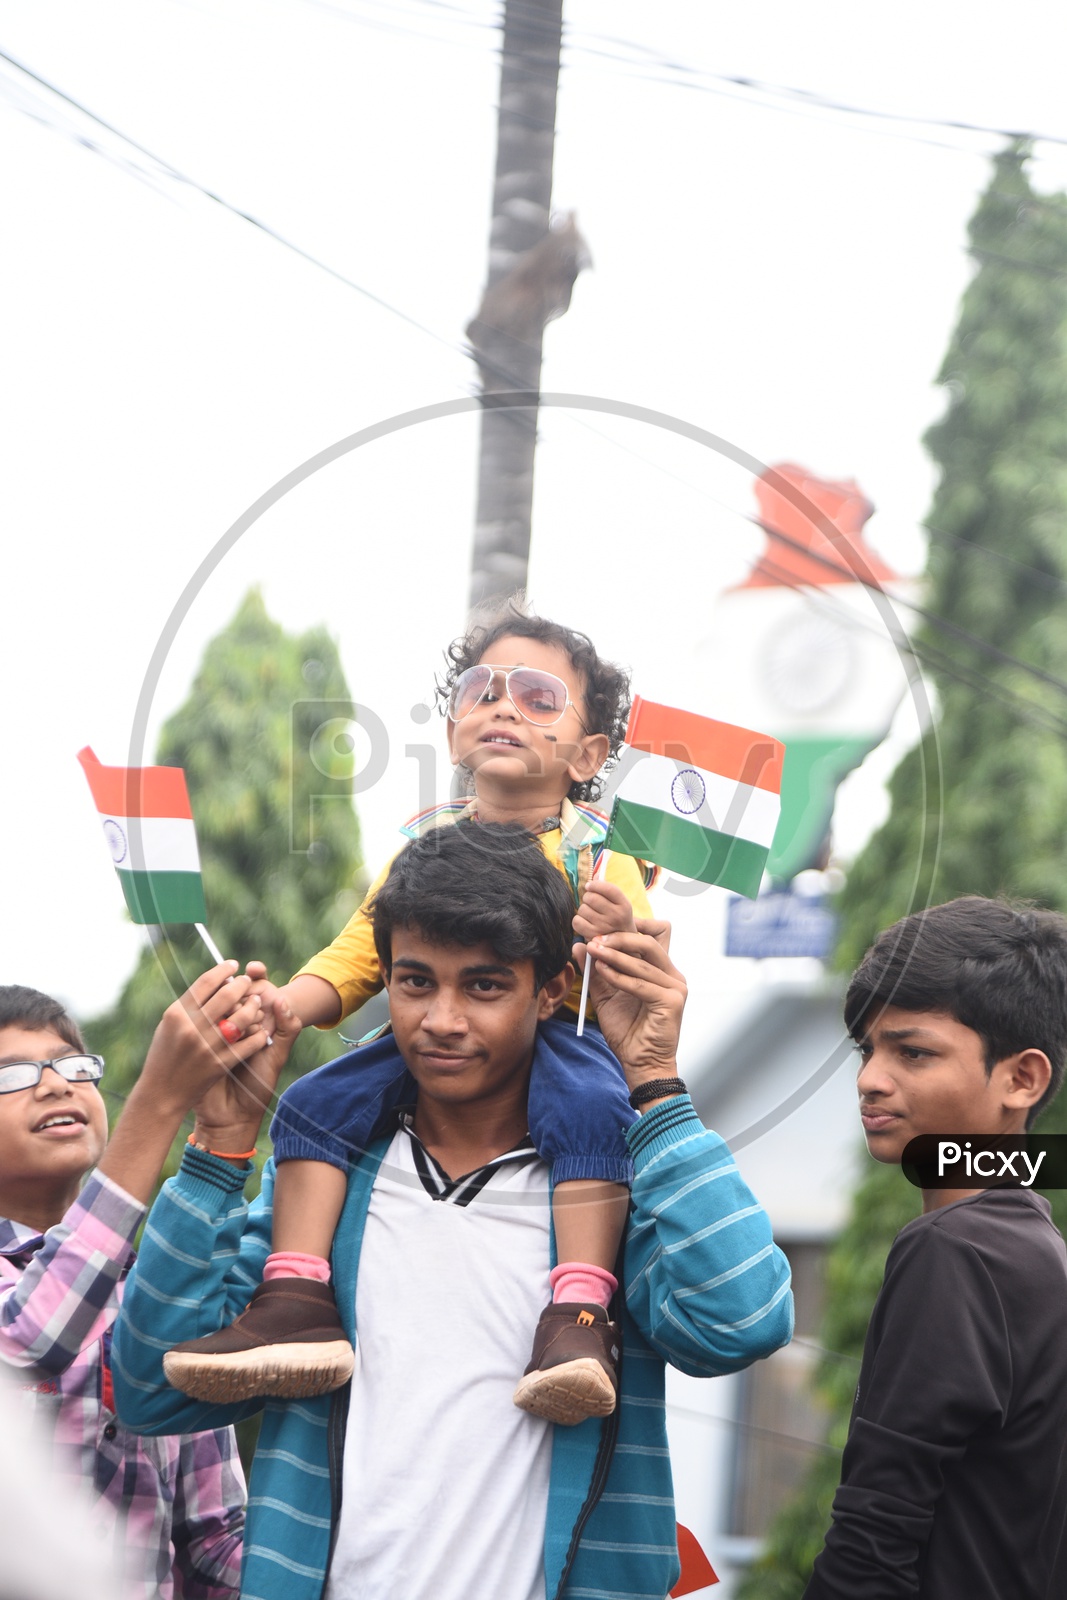 School Children With Indian National Flags At Independence Day Event